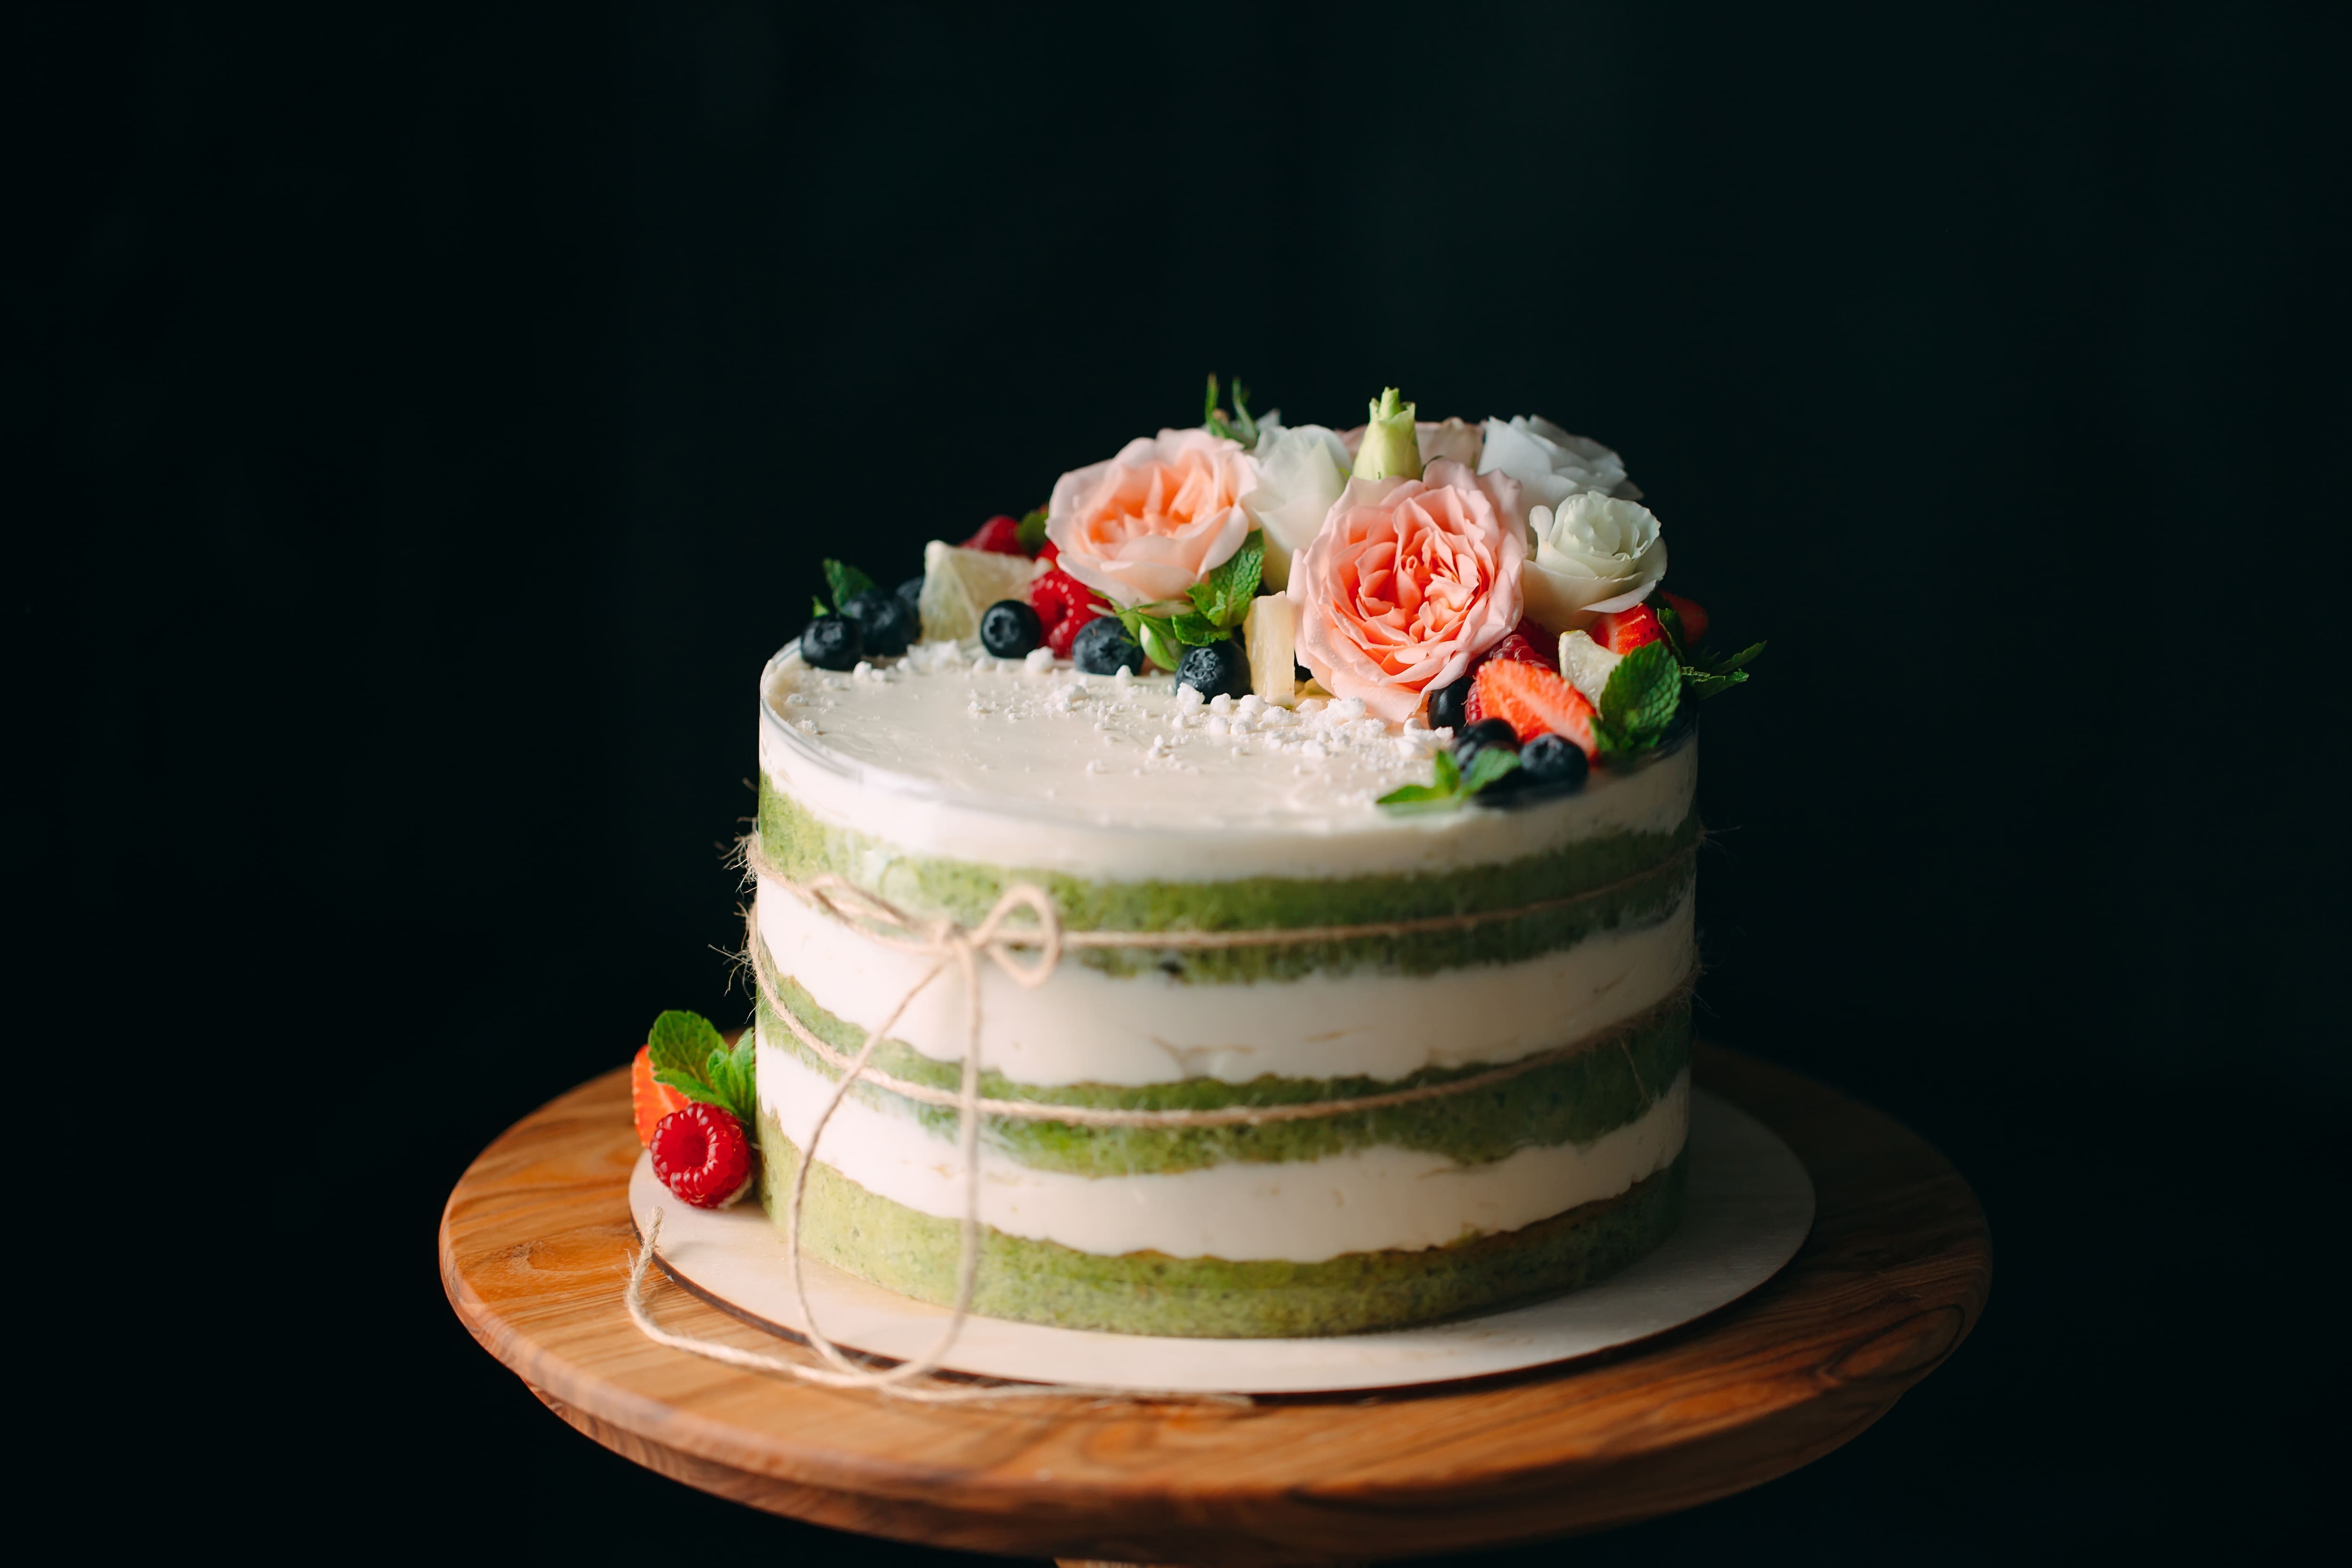 Discover more than 59 cakes on cart agartala best - awesomeenglish.edu.vn